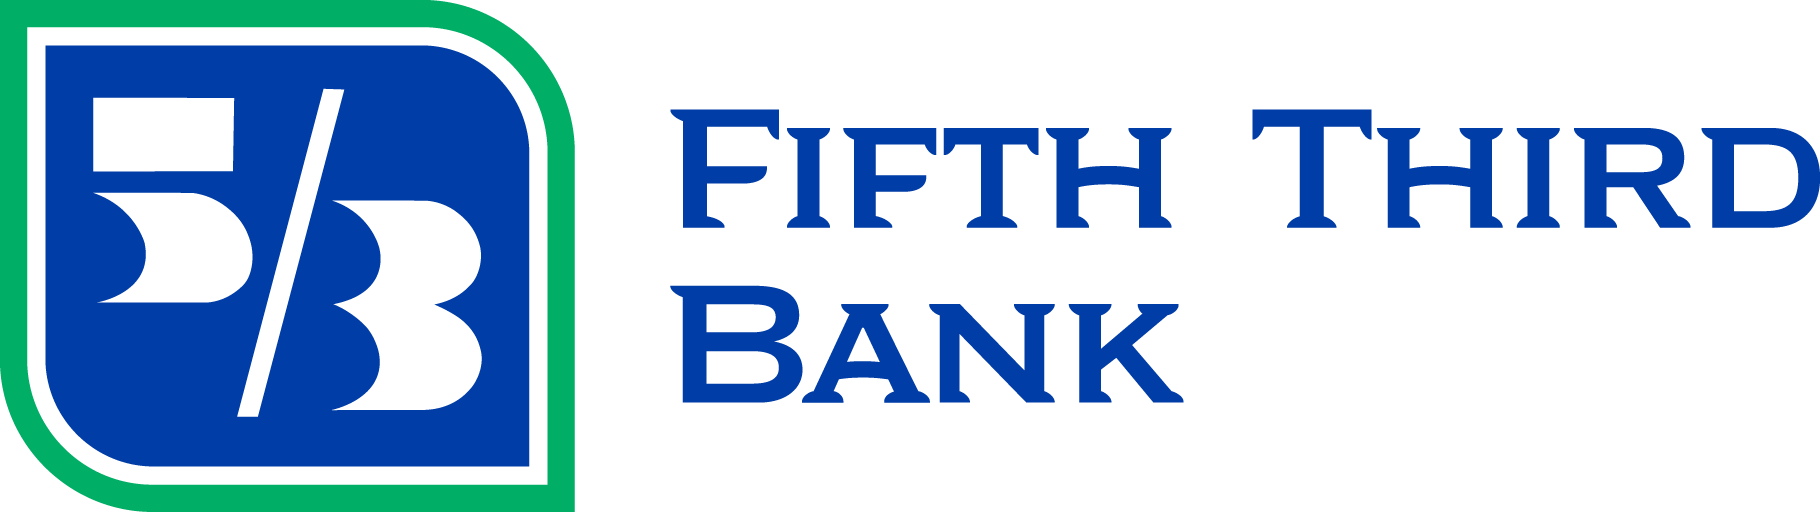 Fifth Third Bank - Whitehall